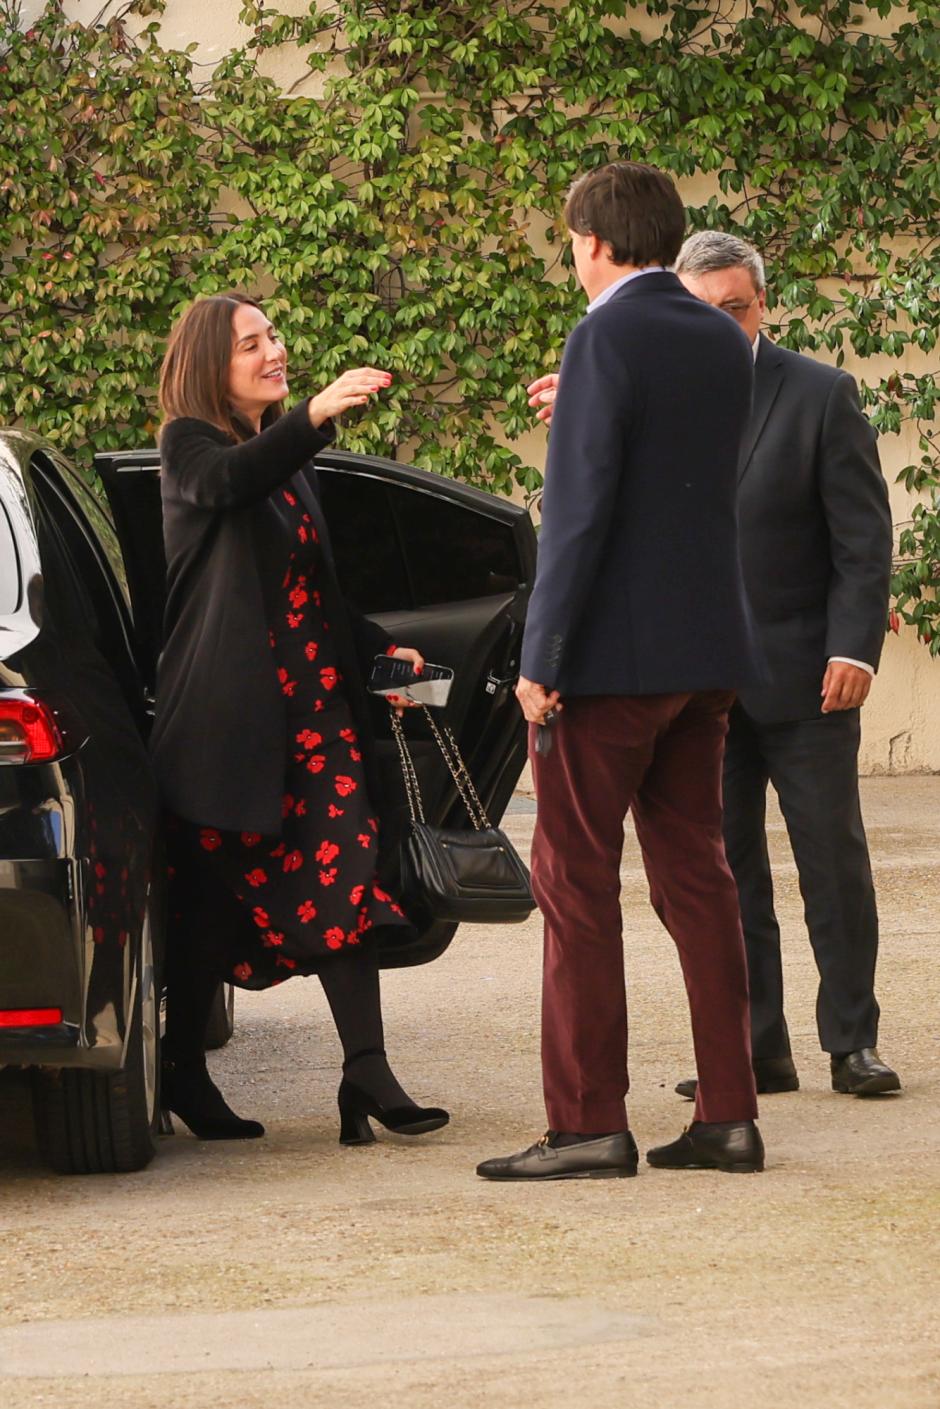 Manolo Falco and Tamara Falco arriving to ManoloFalcoHouse in Madrid on Sunday, 25 December 2022.